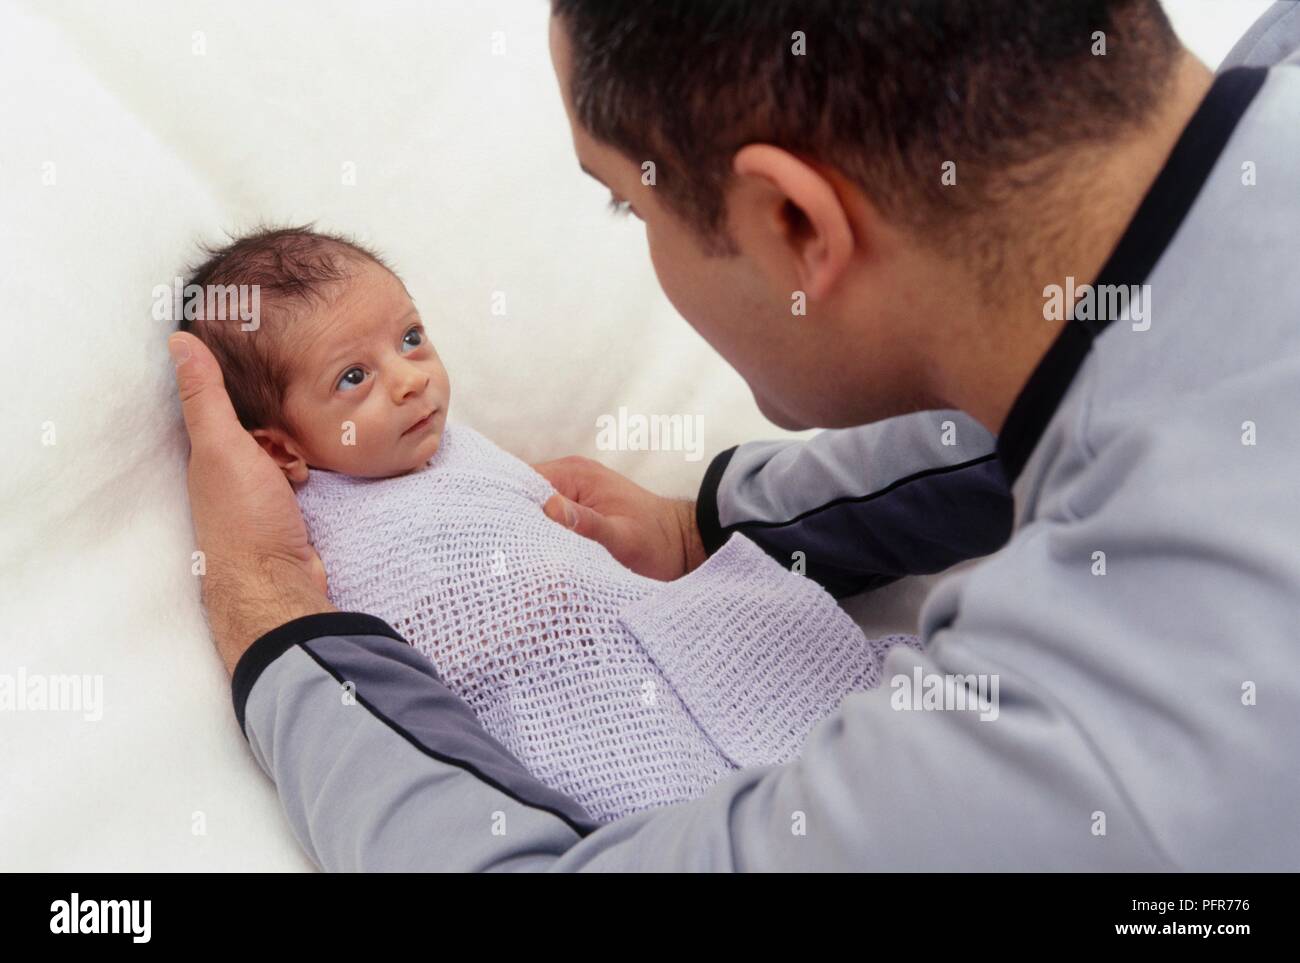 Man wrapping baby boy in blanket, close-up Stock Photo